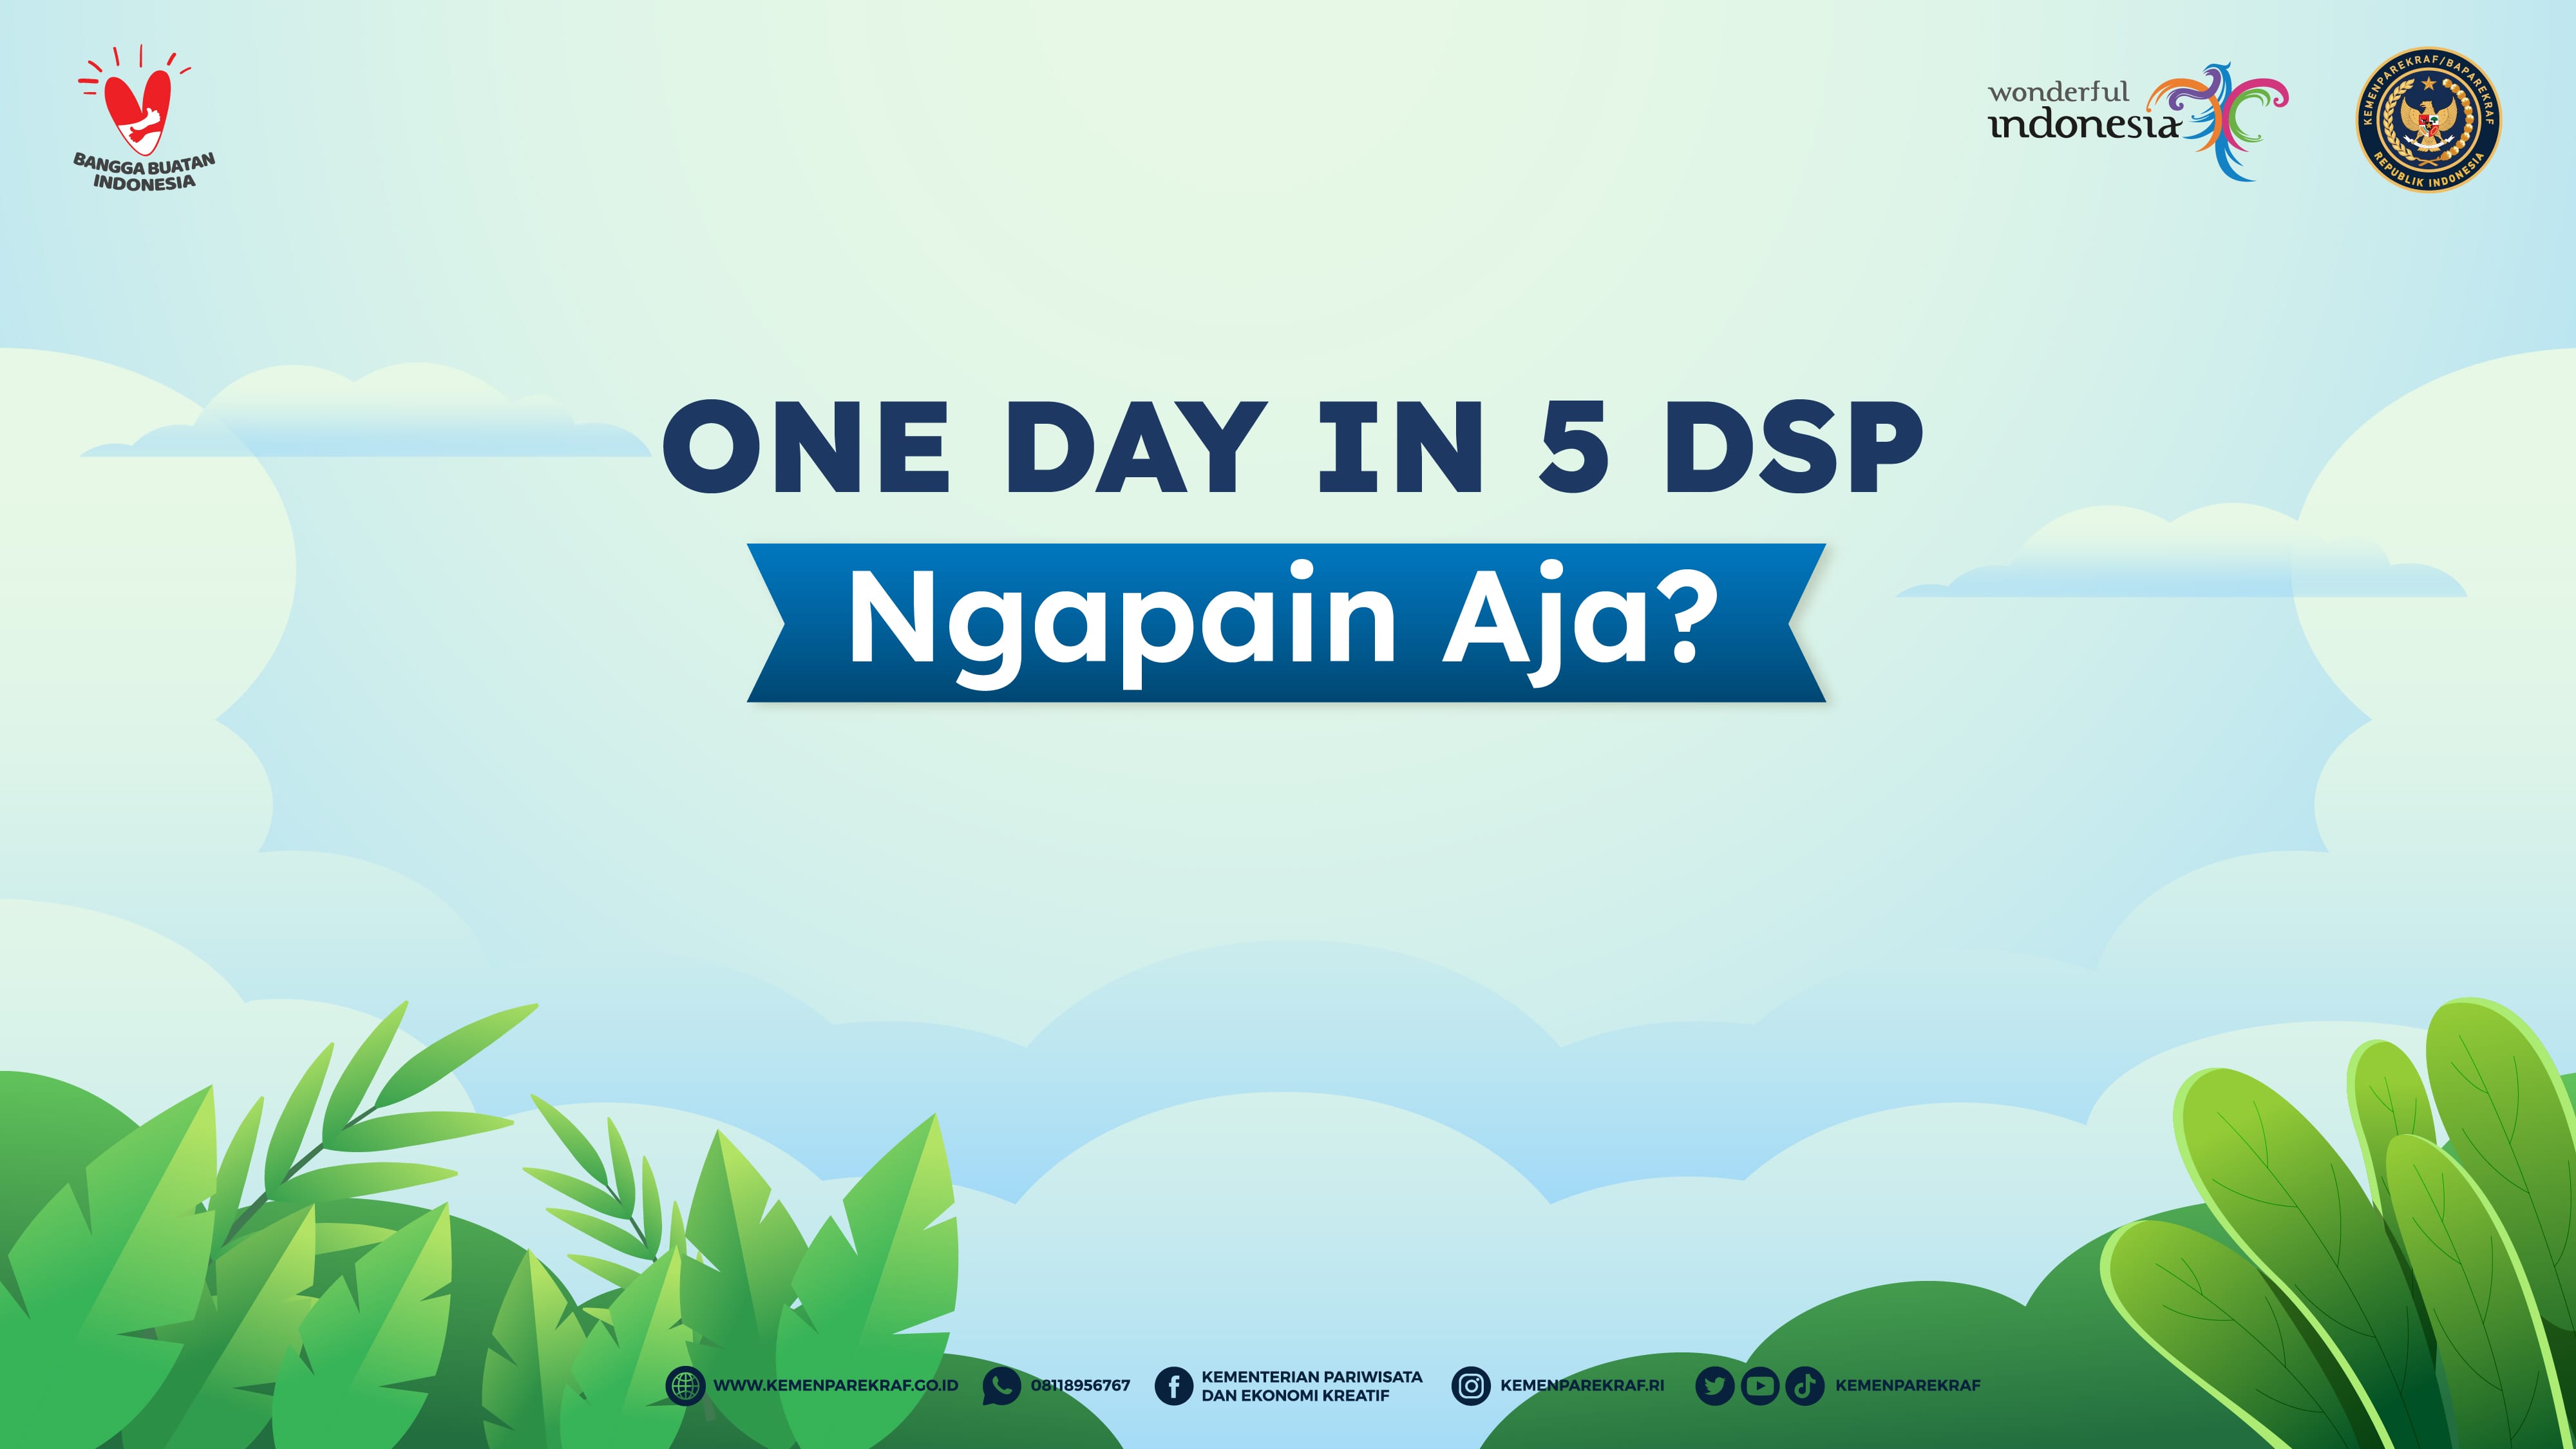 One Day in 5 DSP, Ngapain Aja?